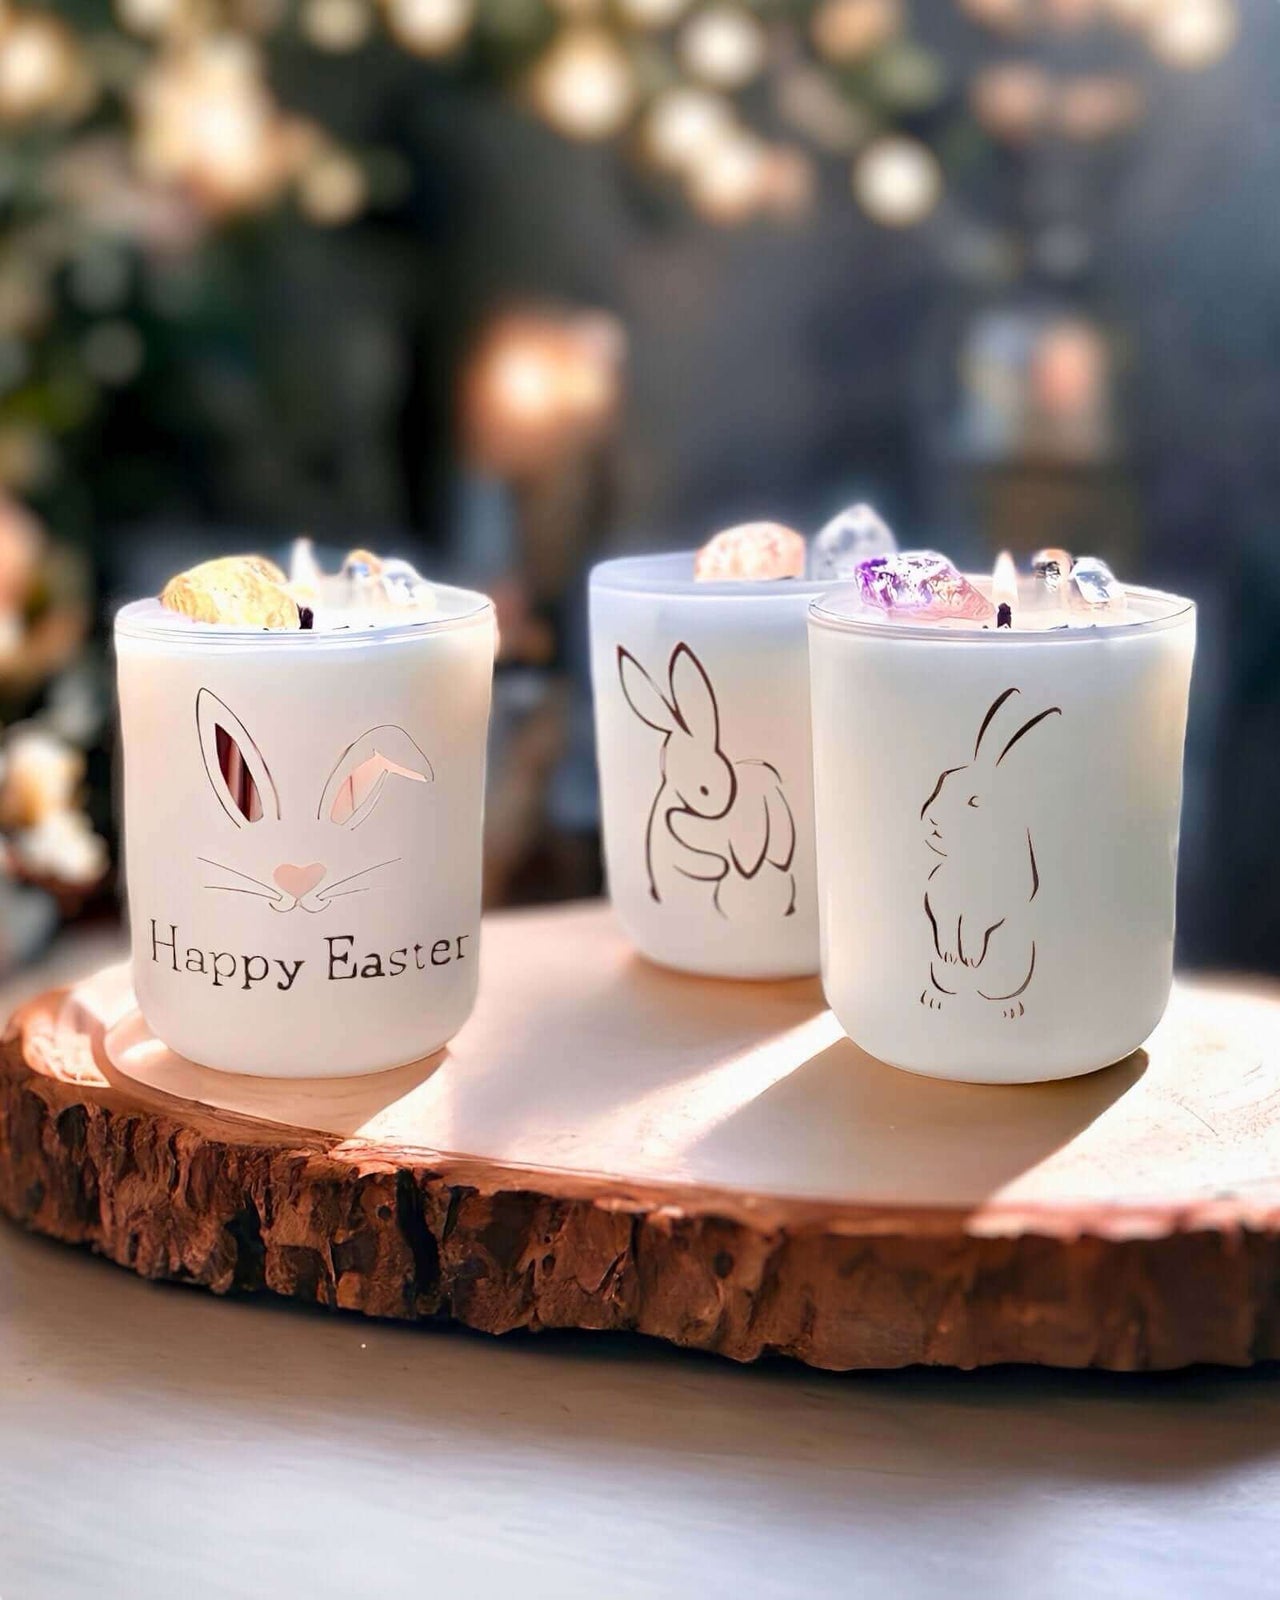 Discover the Luxury Easter Candle Trio, perfect for the Easter Celebration. Rose Quartz, Amethyst, and Citrine crystals add a unique touch to these handcrafted candles. $89.95